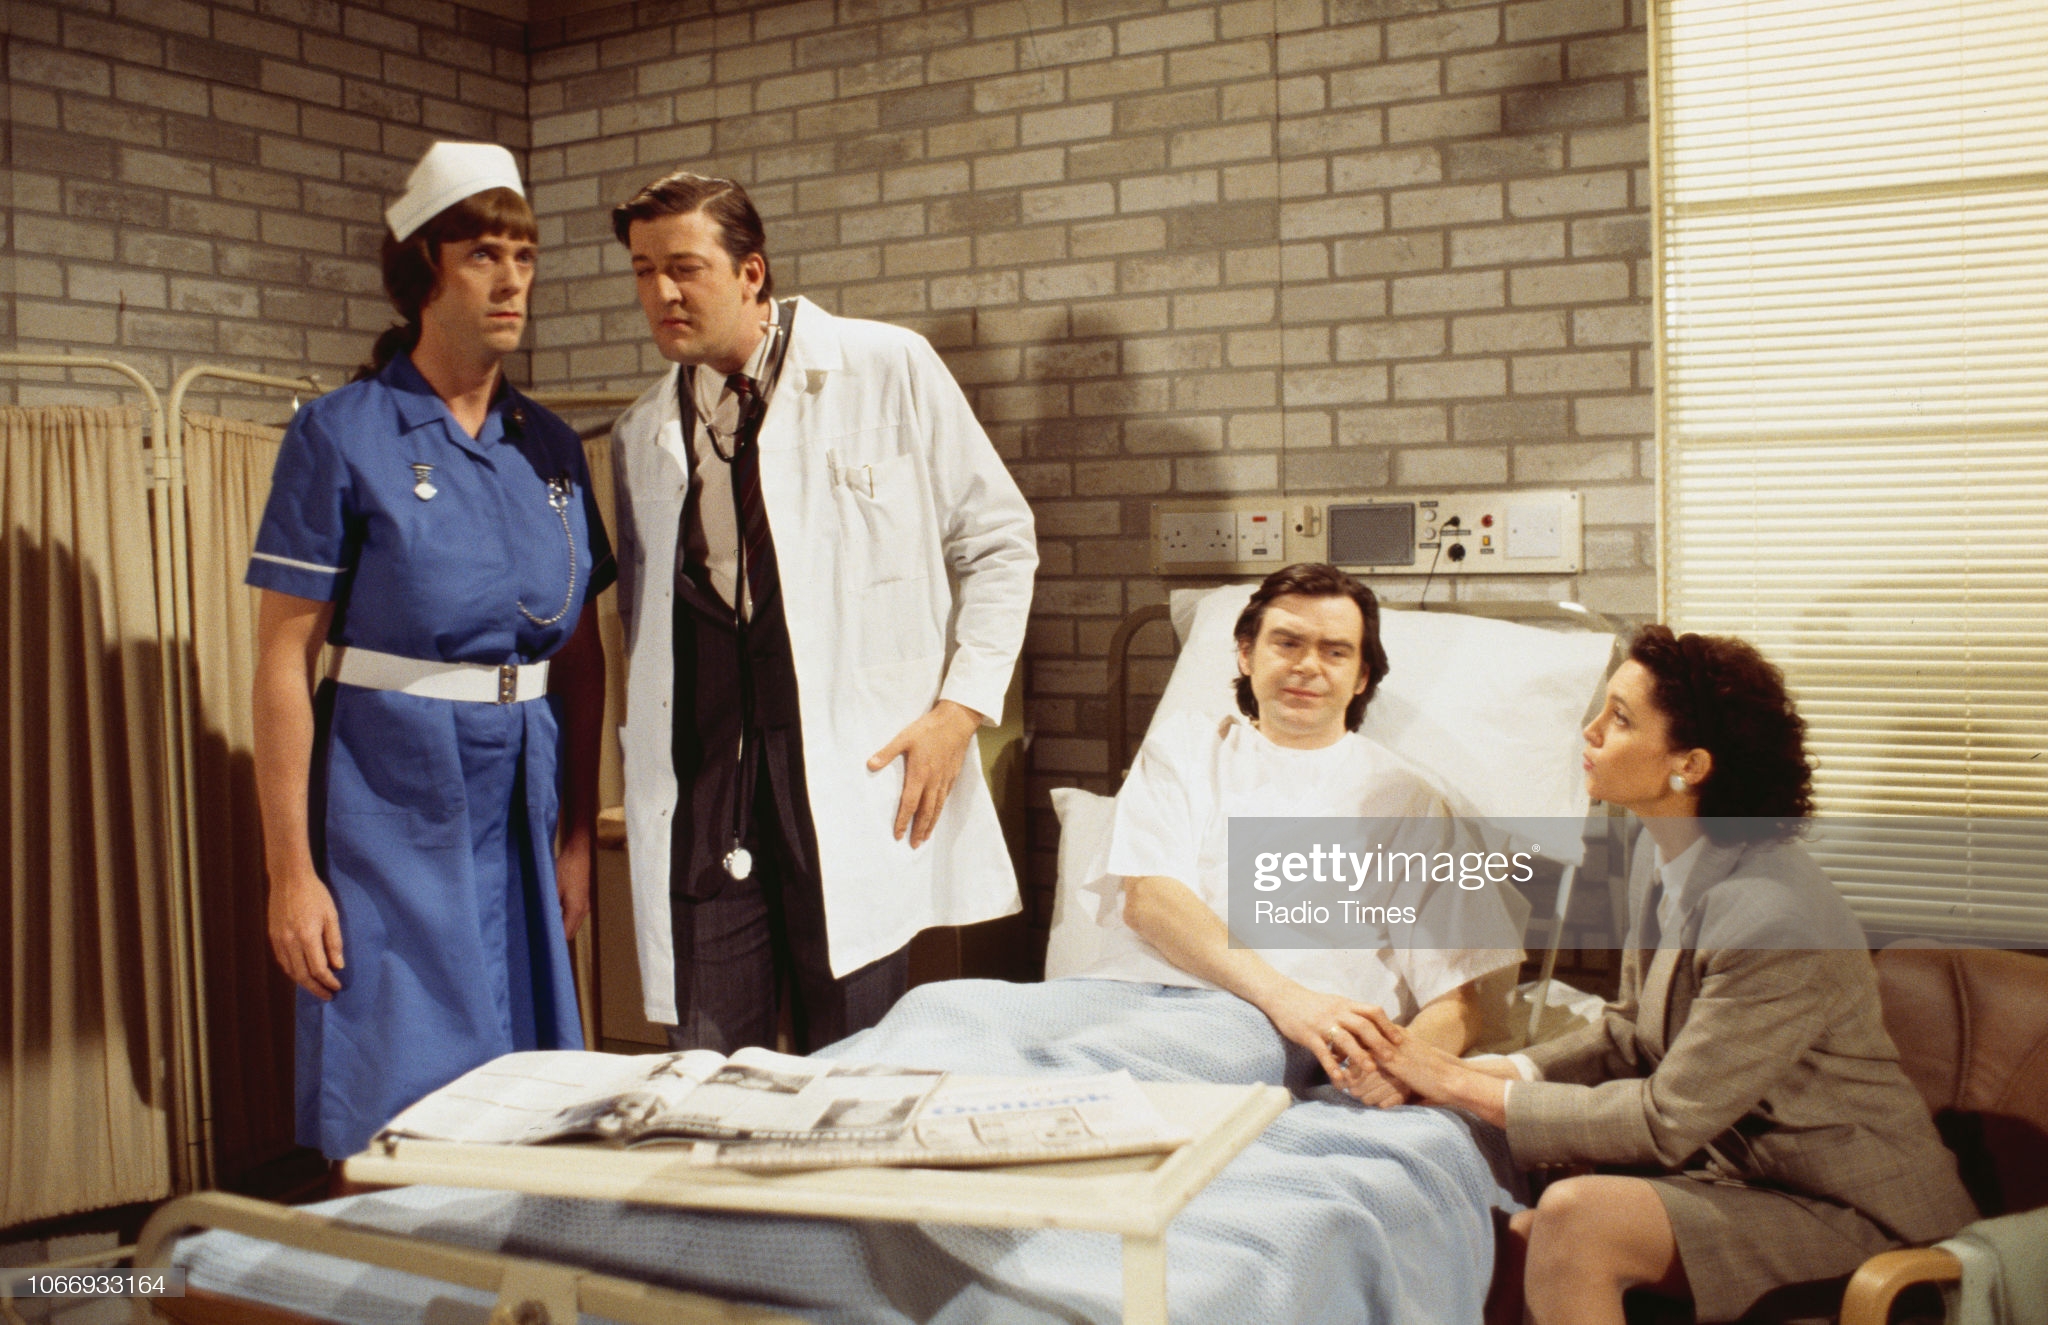 Comic actors (L-R) Hugh Laurie, Stephen Fry, Kevin McNally and Fiona Gillies in a hospital sketch from the BBC television series 'A Bit of Fry and Laurie', March 22nd 1994. (Photo by Don Smith/Radio Times/Getty Images